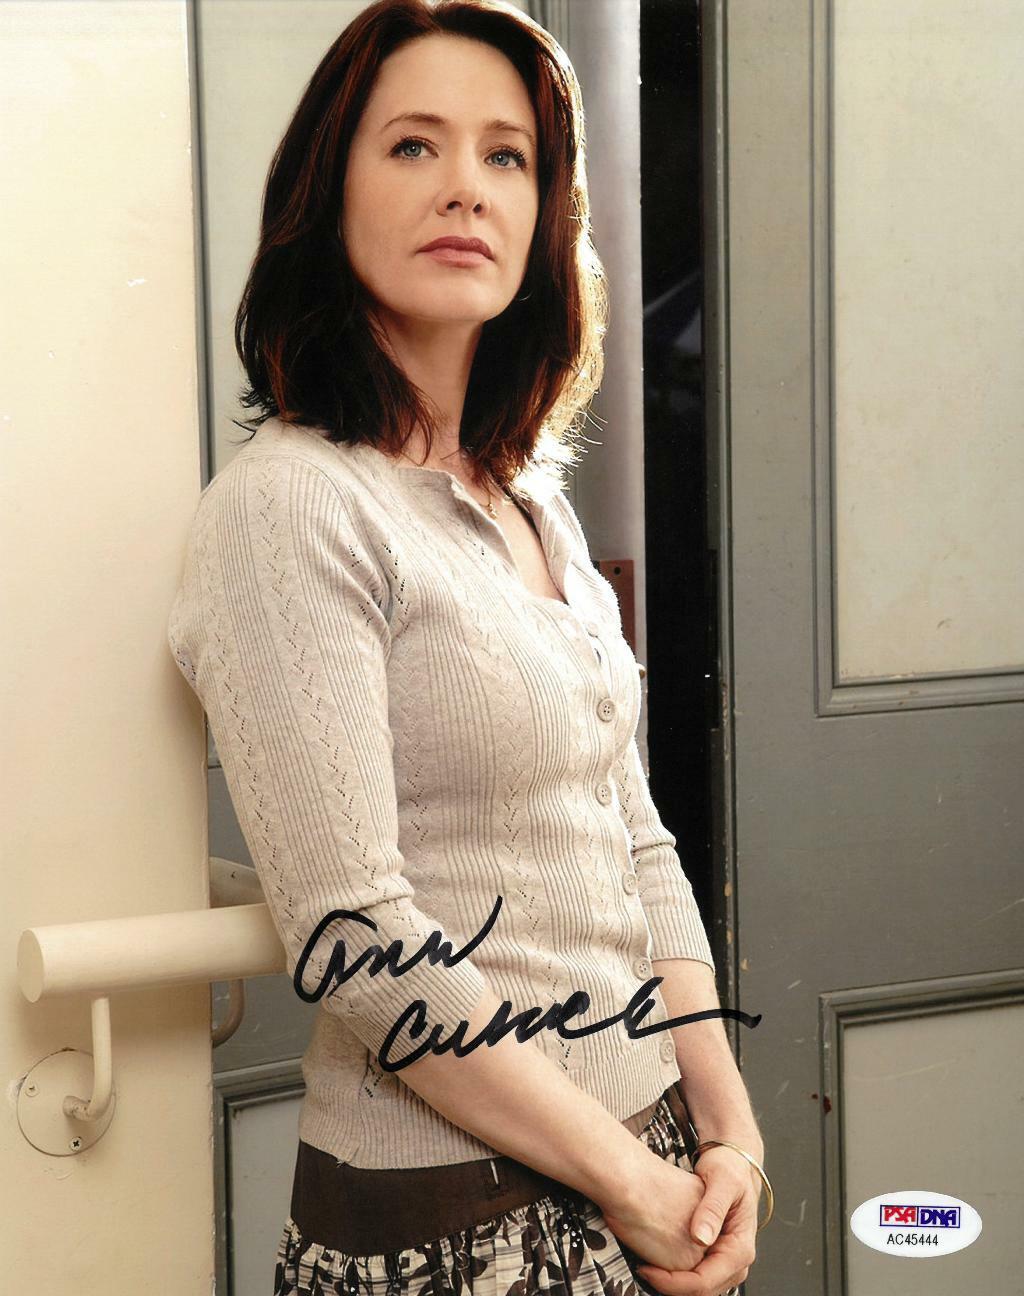 Ann Cusack Signed Authentic Autographed 8x10 Photo Poster painting PSA/DNA #AC45444